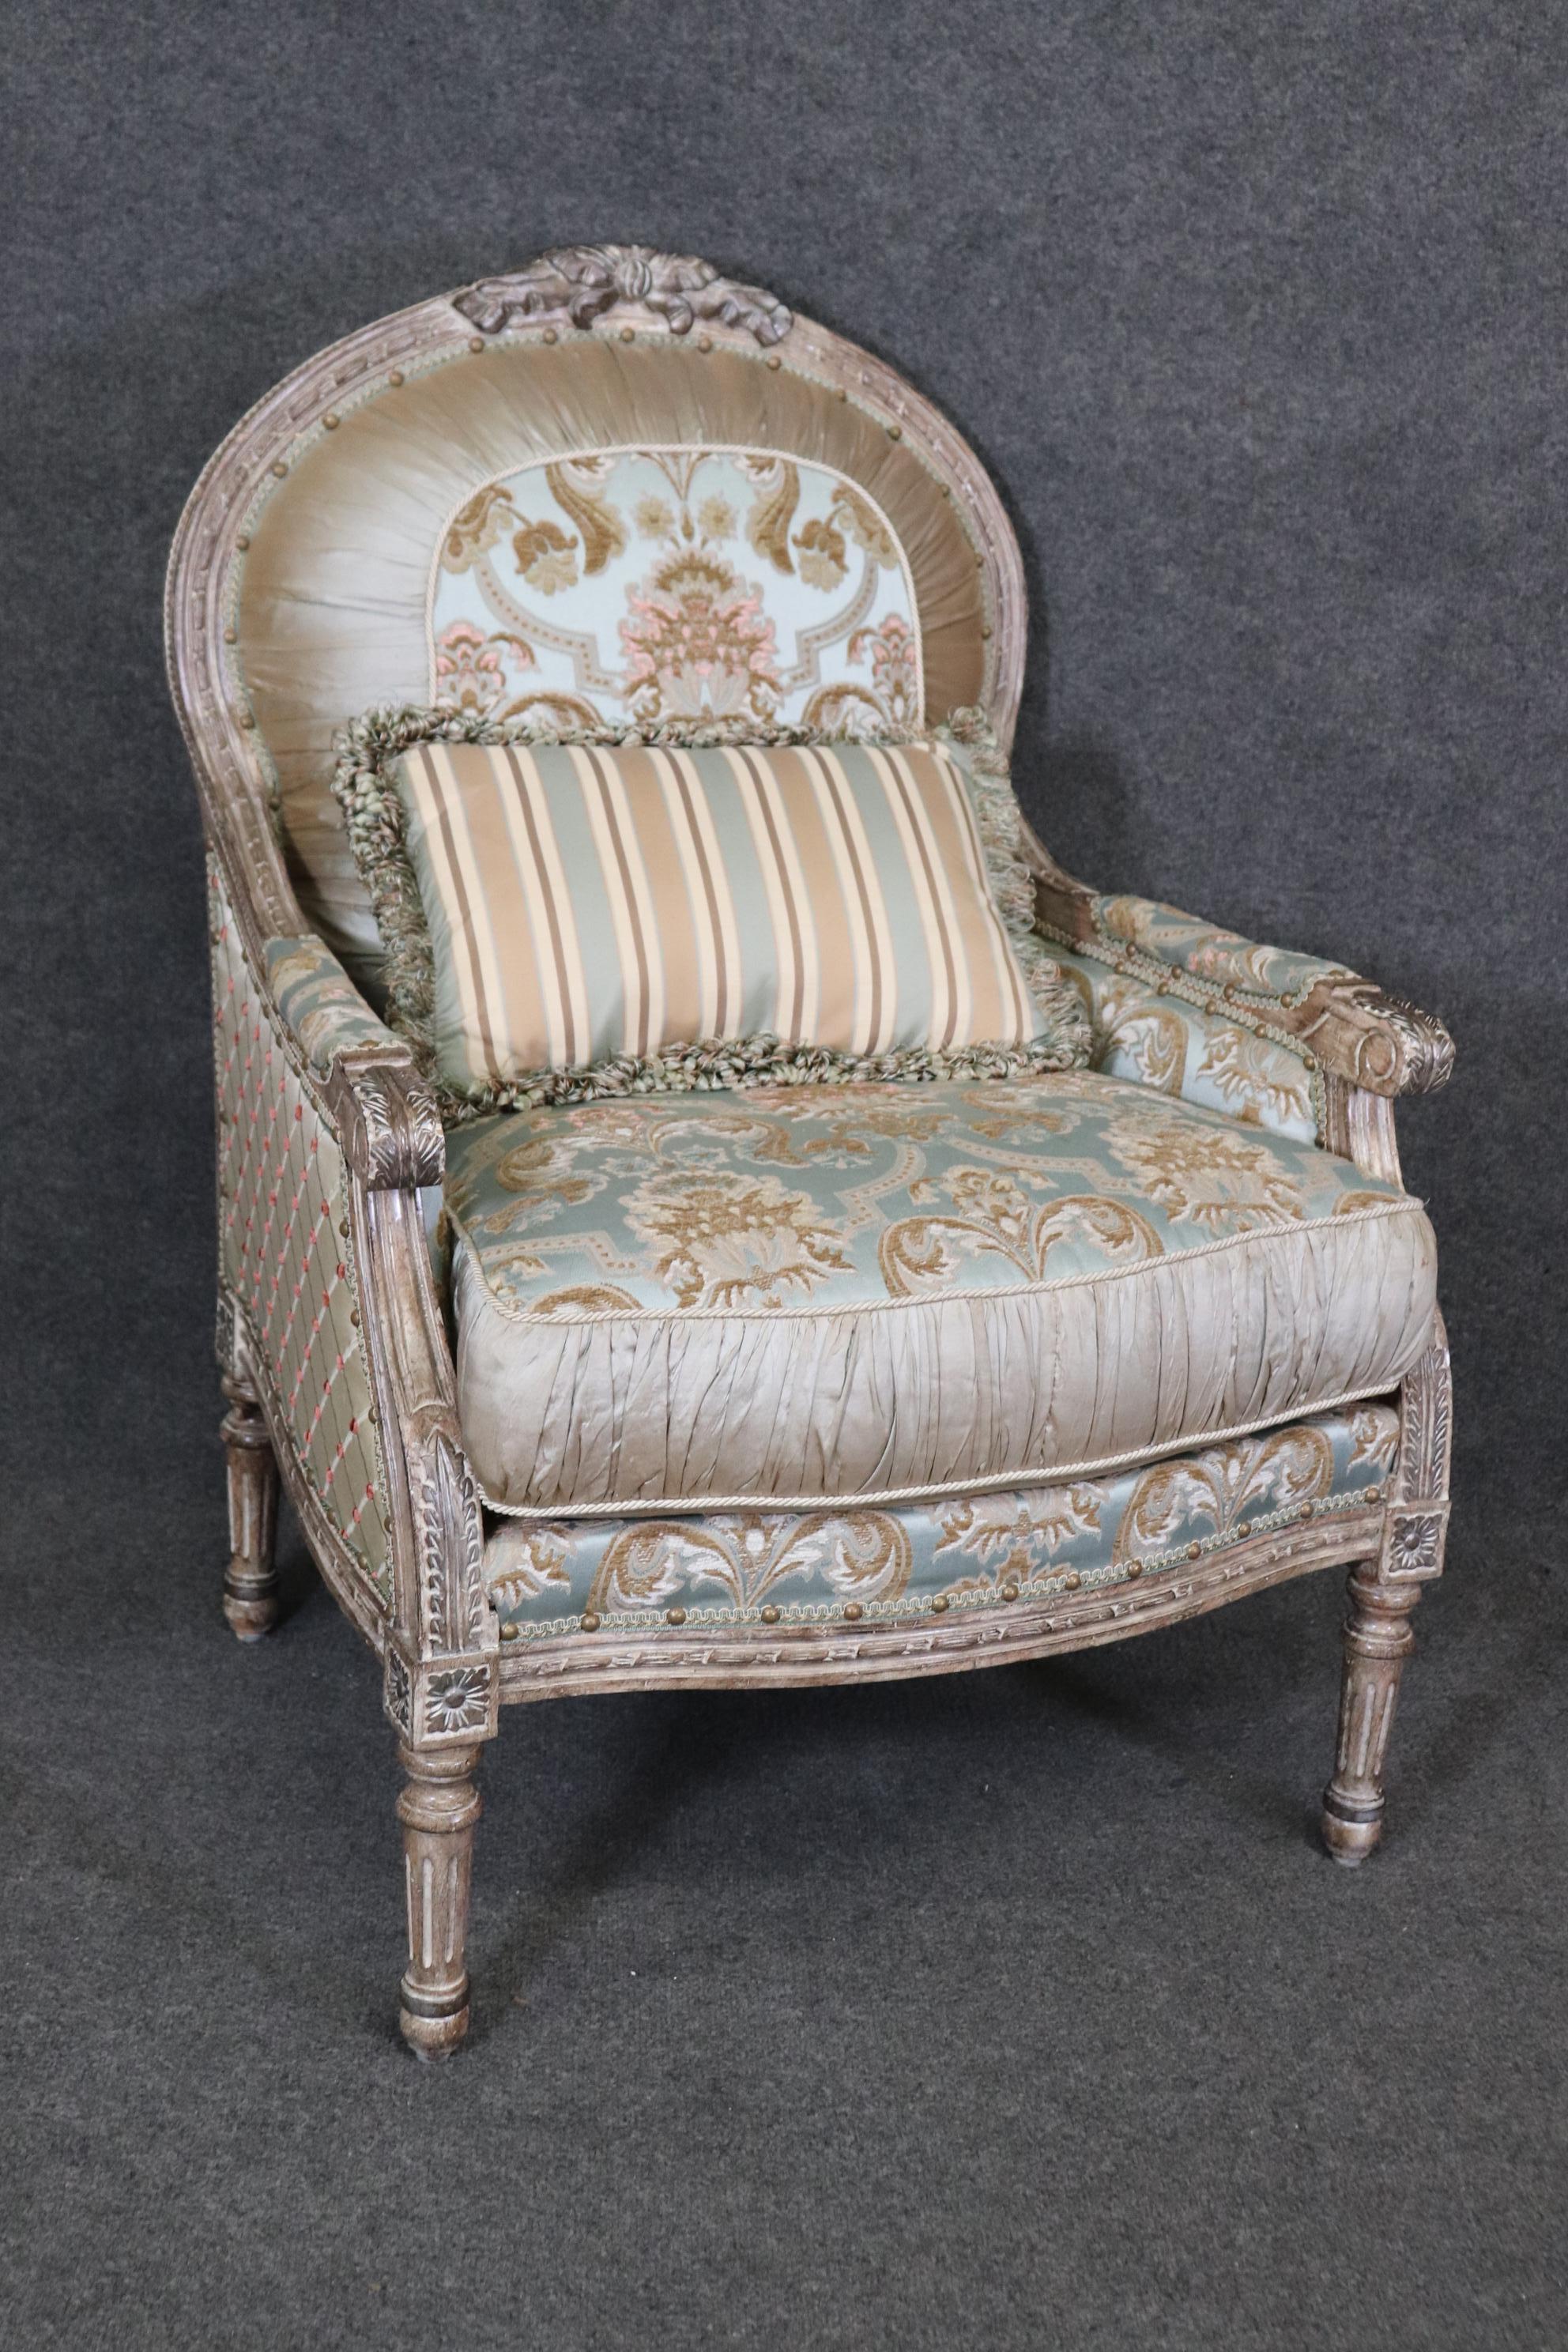 This is one of two pair available listed separately. This is a gorgeous pair of custom-upholstered French Louis bergere chairs or club chairs with gorgeous creme painted distressed finished frames and silver details on some of the carved areas. The